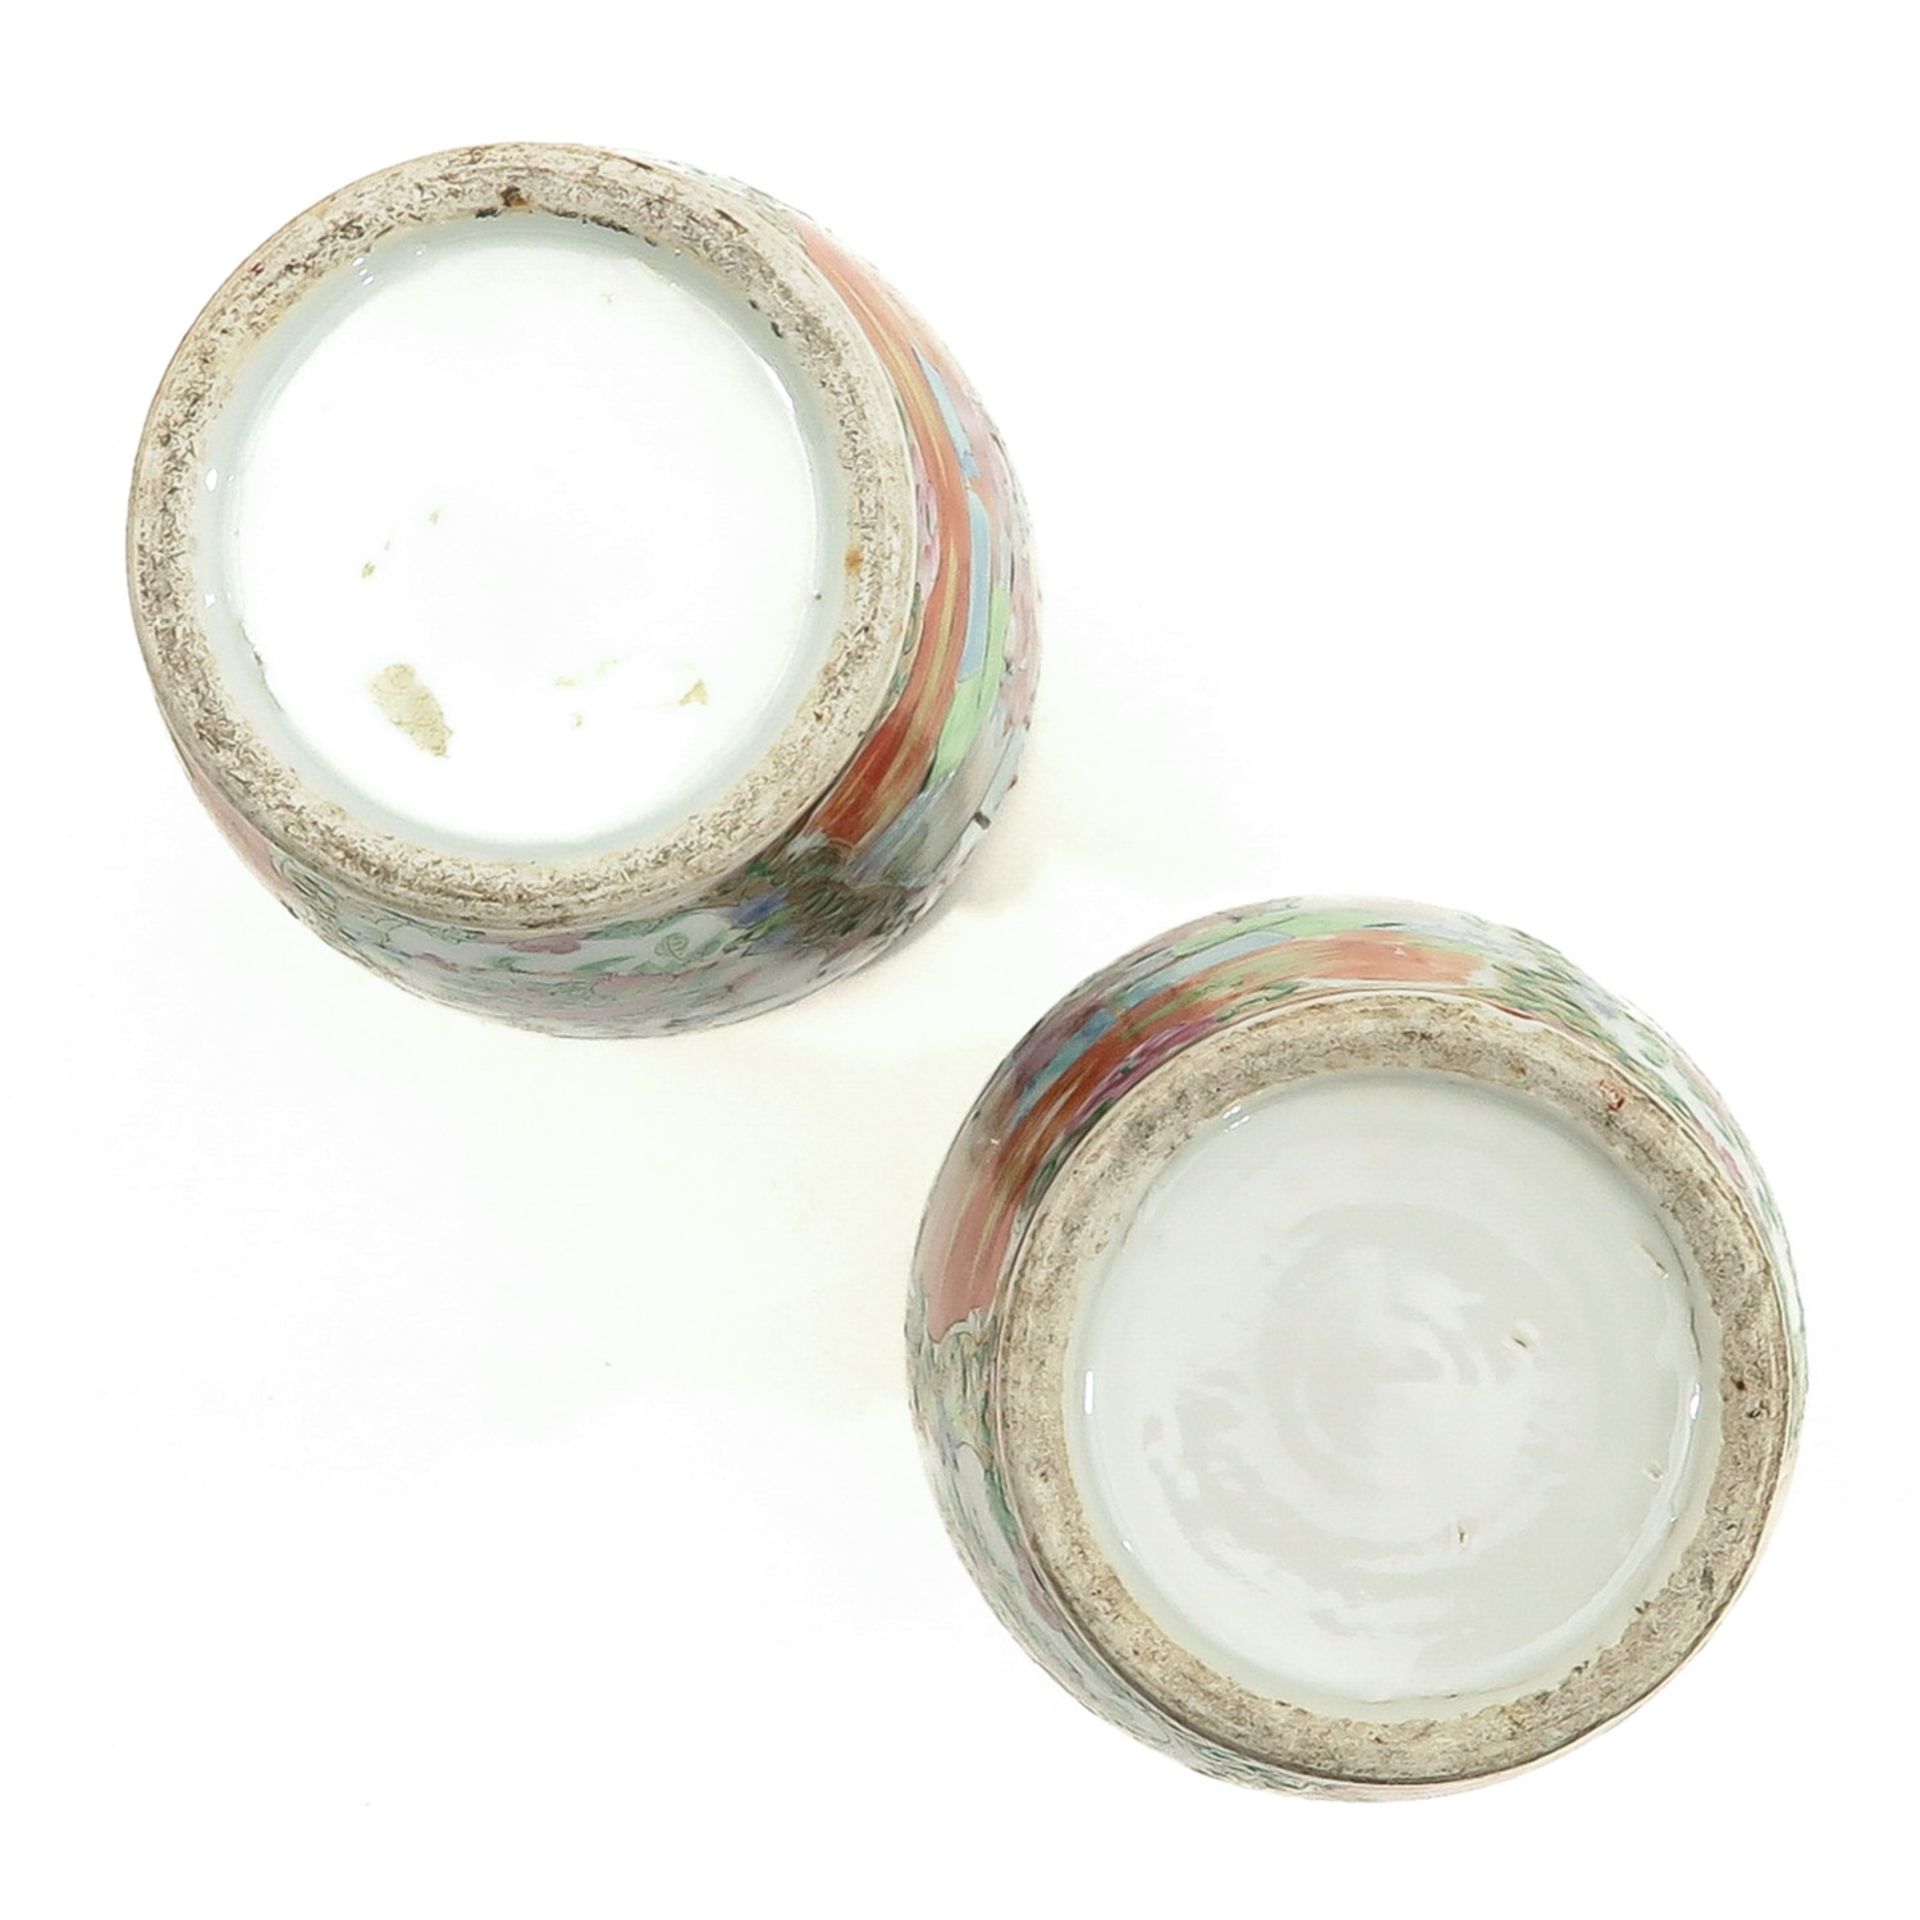 A Pair of Cantonese Vases - Image 6 of 10